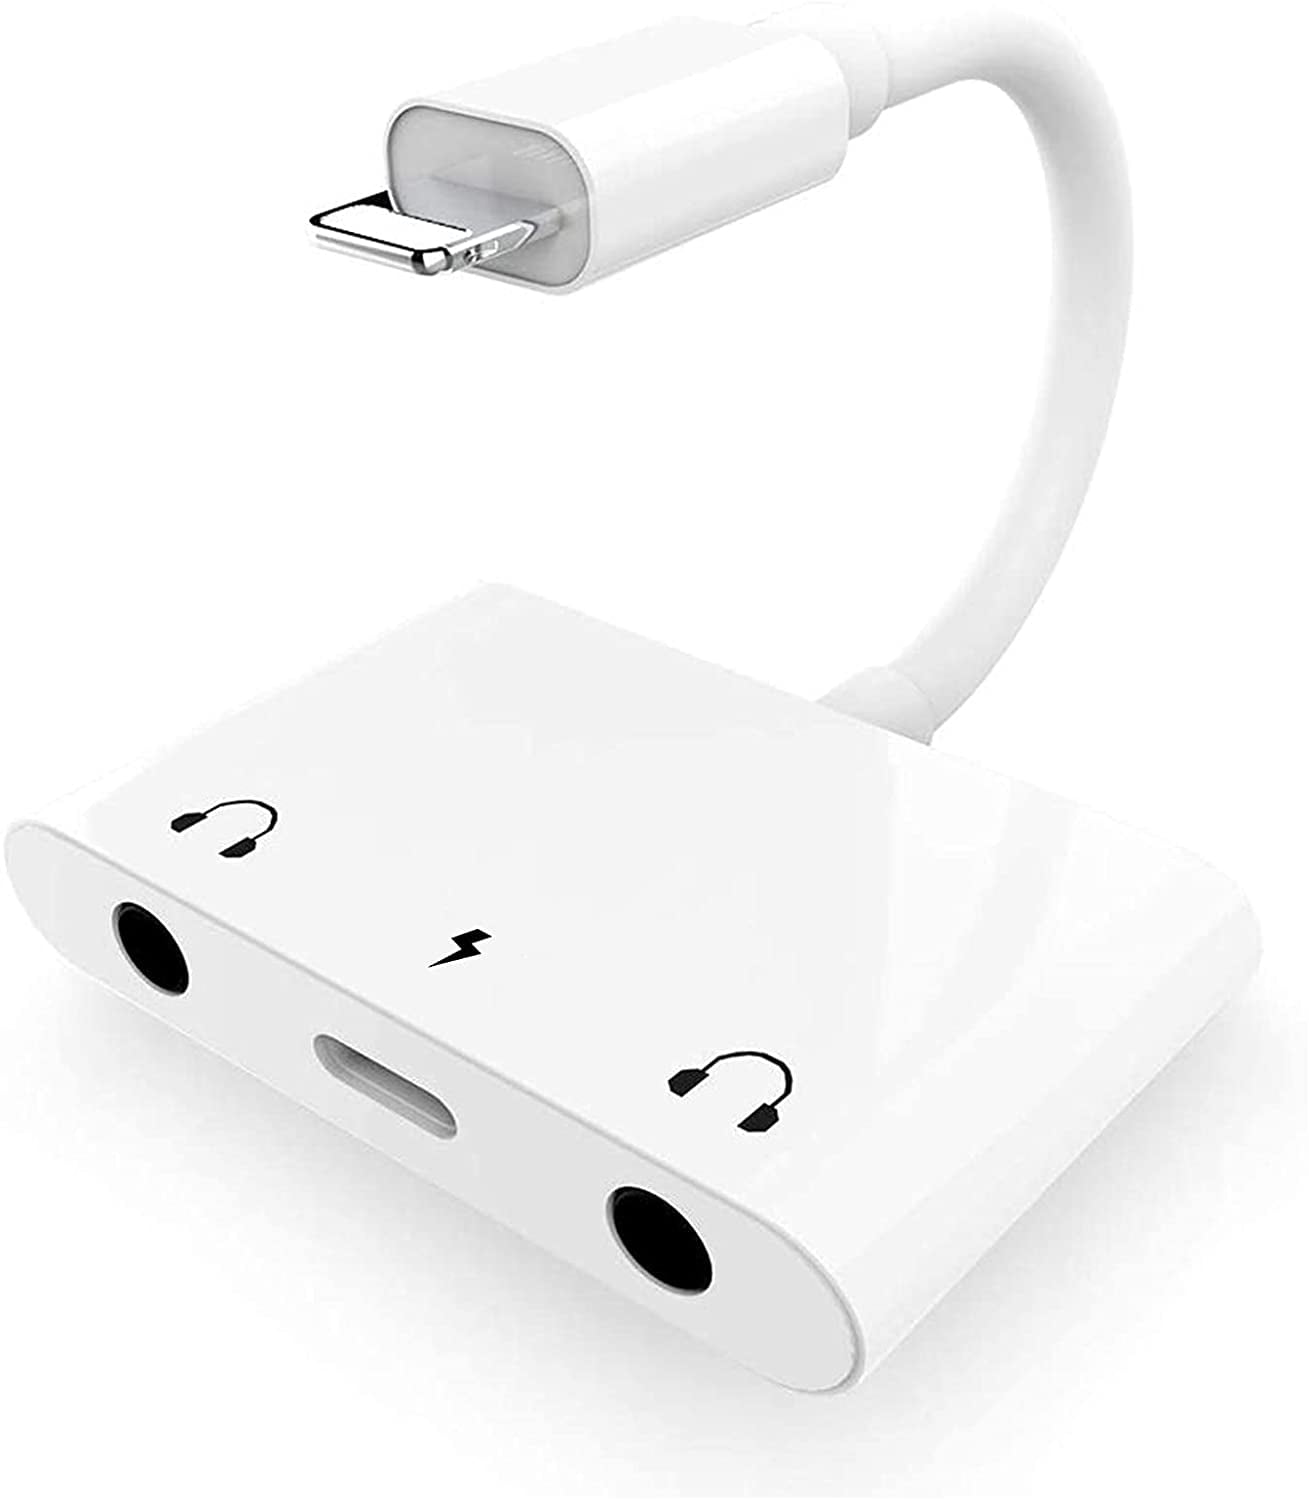  Headphone Adapter for iPhone 11 Dongle Charger 3.5mm Jack AUX  Audio Splitter for iPhone 11/X/XS/Max/XR 7/8/8 Plus Accessory Dongle  Headset Cable Convertor Support All iOS Systems-White : Electronics